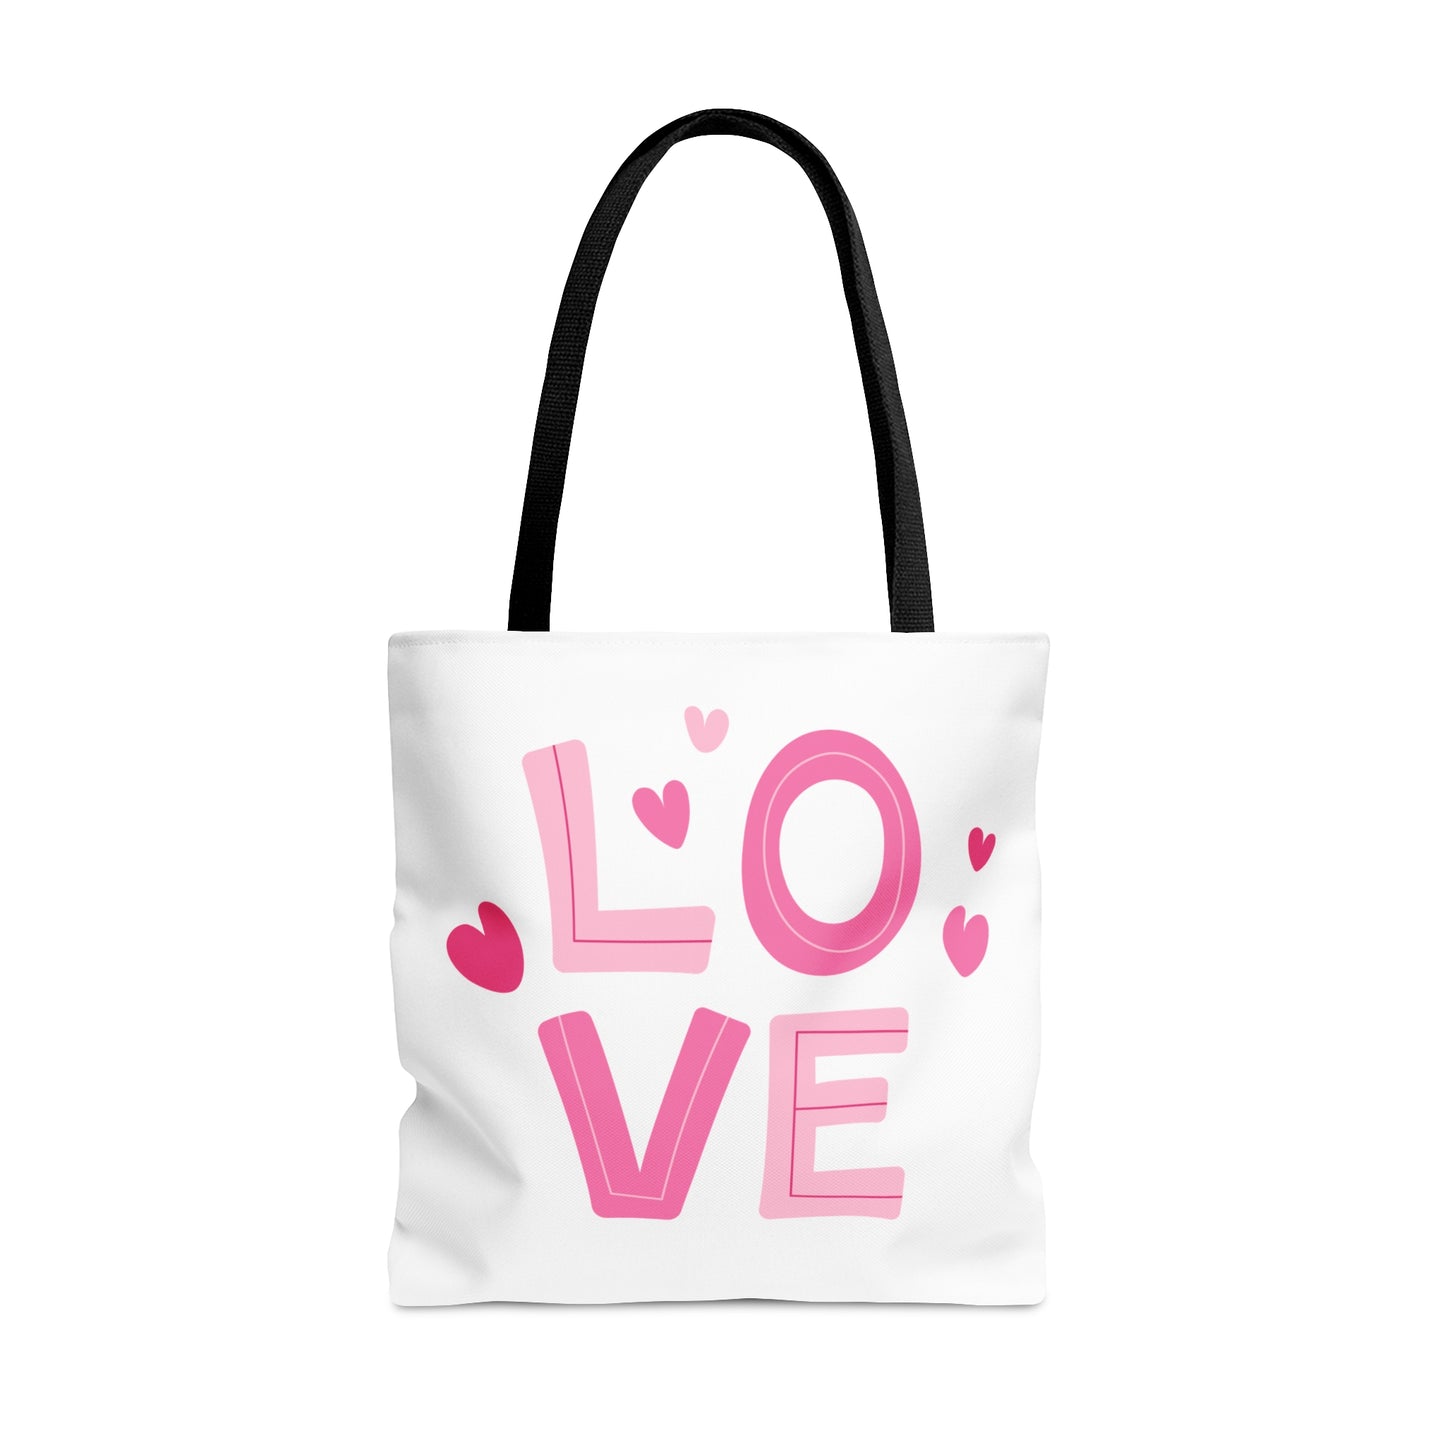 Love with Heart Printed Tote Bag, Valentine's Tote Bag, 3 Sizes